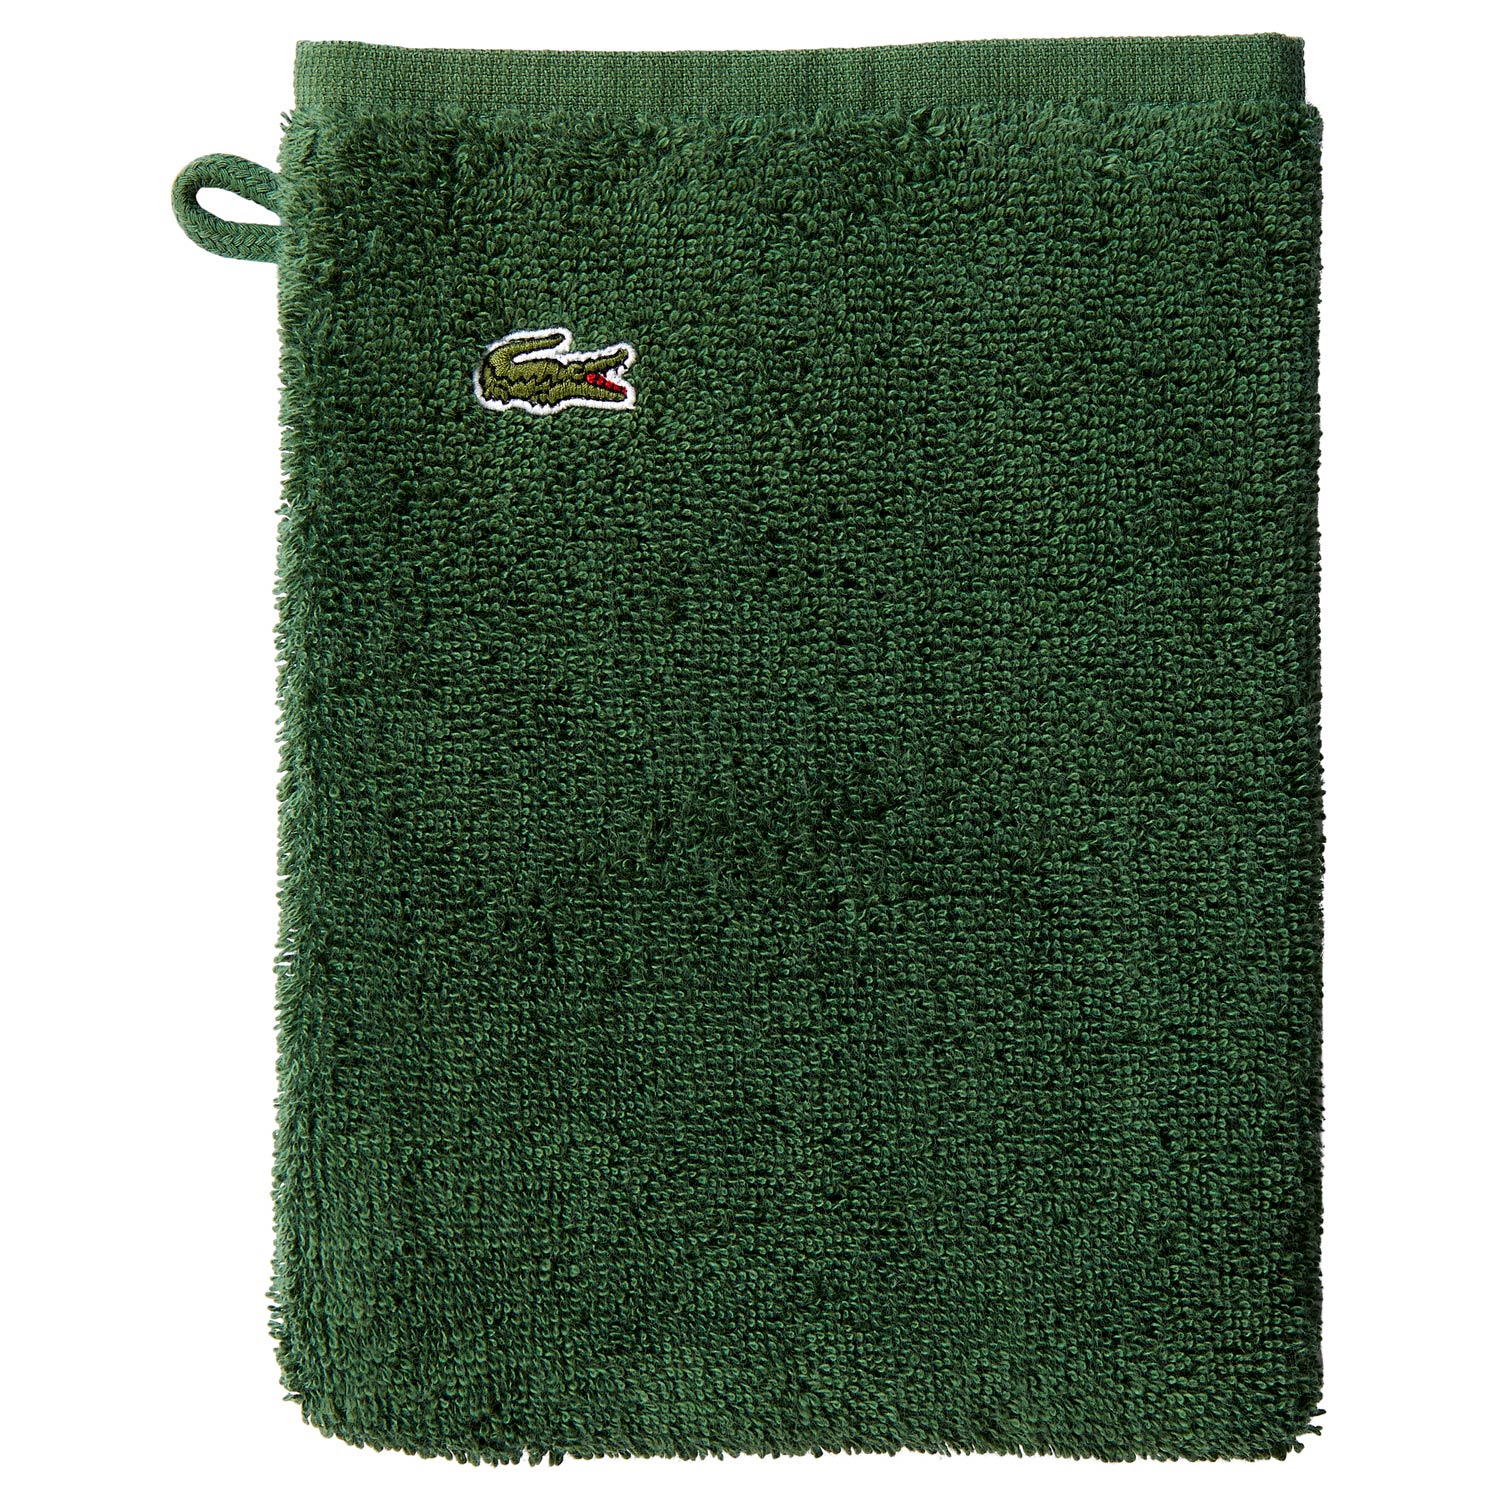 https://cdn.shopify.com/s/files/1/0084/7763/8711/products/lacoste-le-croco-towels-green-face-mitt.jpg?v=1618910505